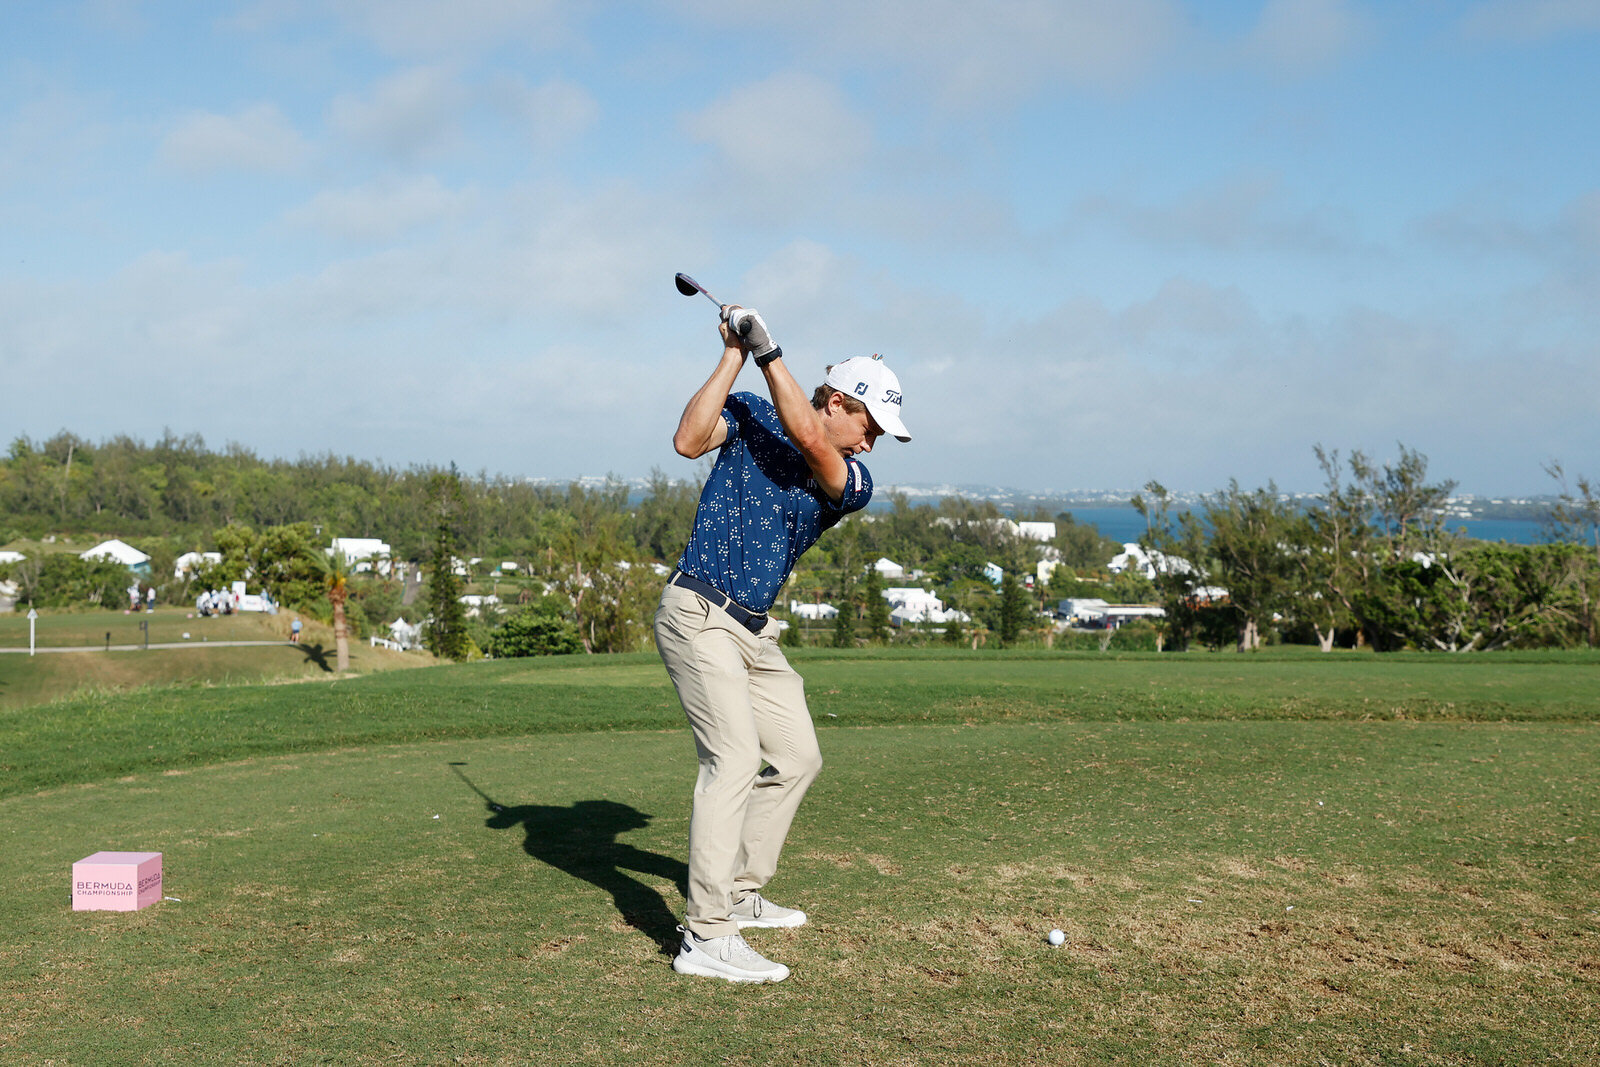  SOUTHAMPTON, BERMUDA - OCTOBER 30: Peter Malnati of the United States plays his shot from the first tee during the second round of the Bermuda Championship at Port Royal Golf Course on October 30, 2020 in Southampton, Bermuda. (Photo by Gregory Sham